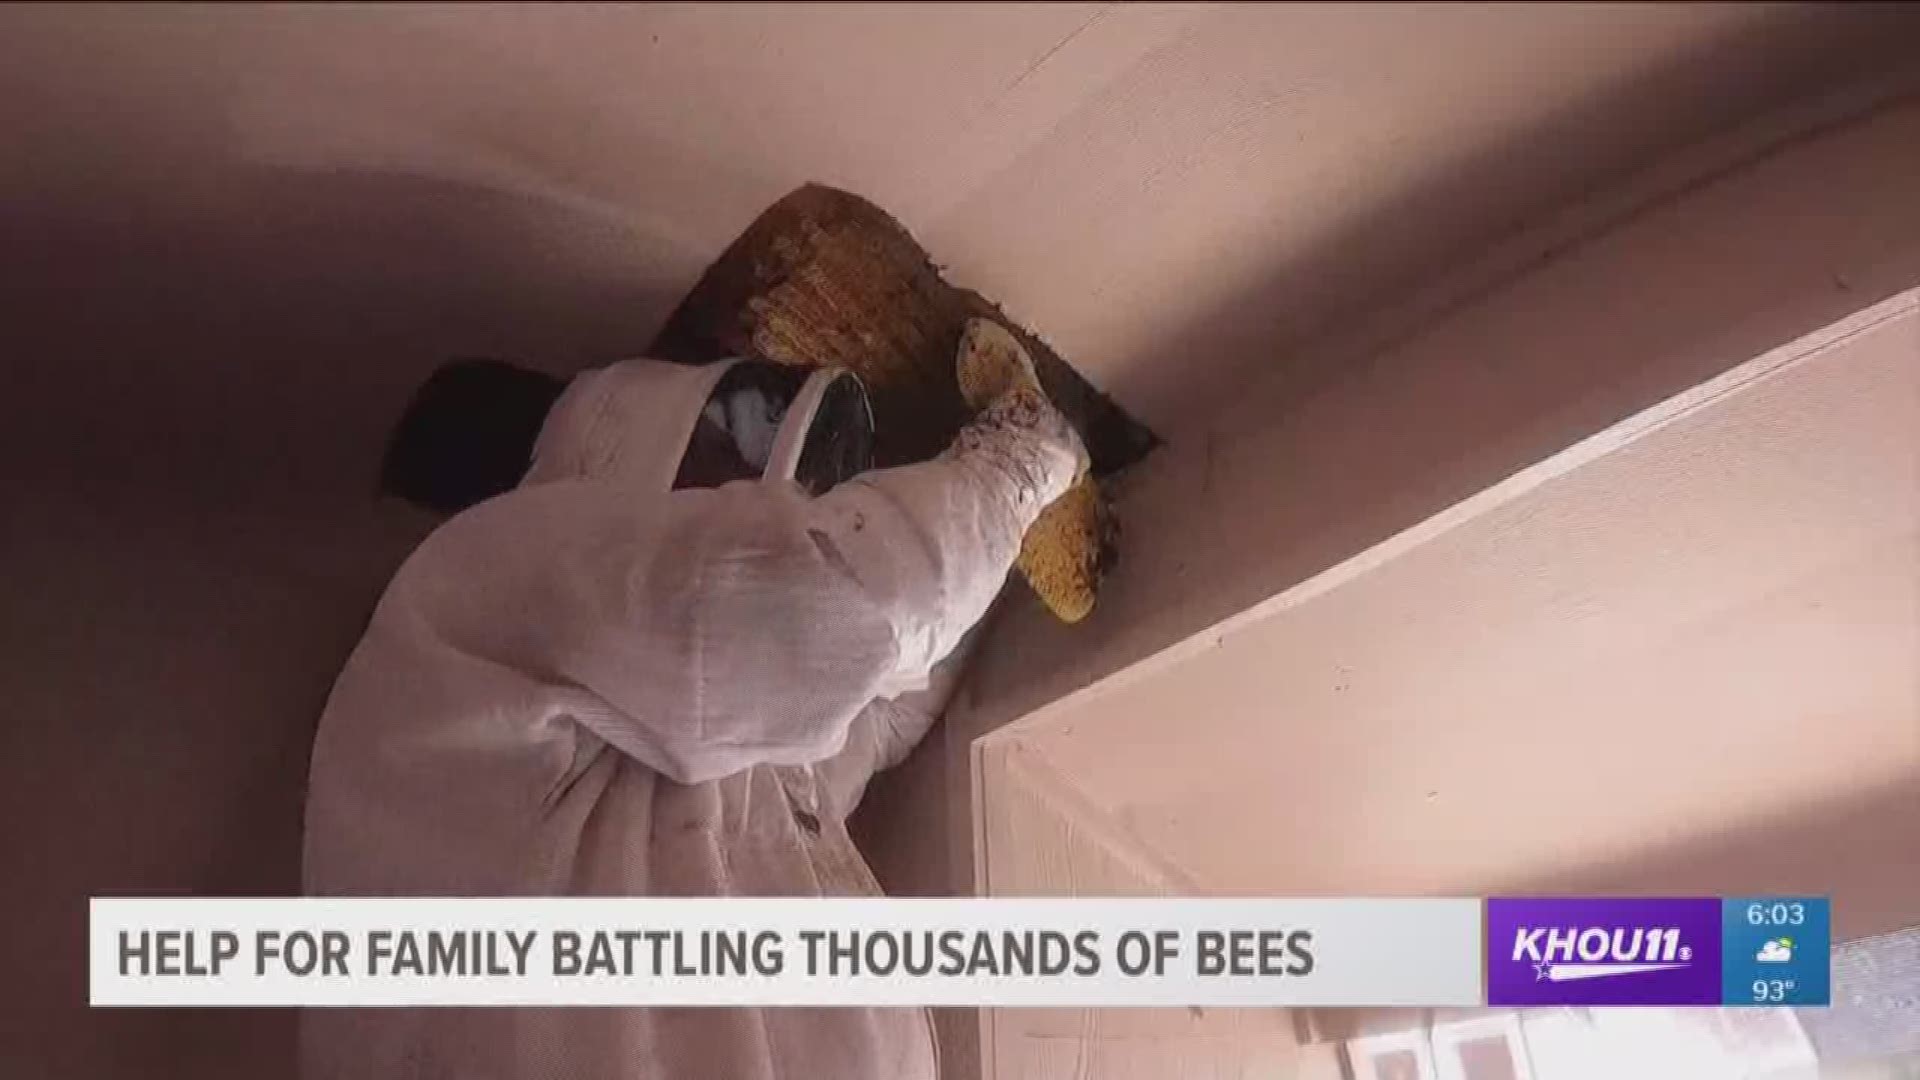 Approximately 80,000 bees were living inside one family's home. They removed the hives and 60 pounds of honeycomb. It was so bad, honey was oozing from the vents.